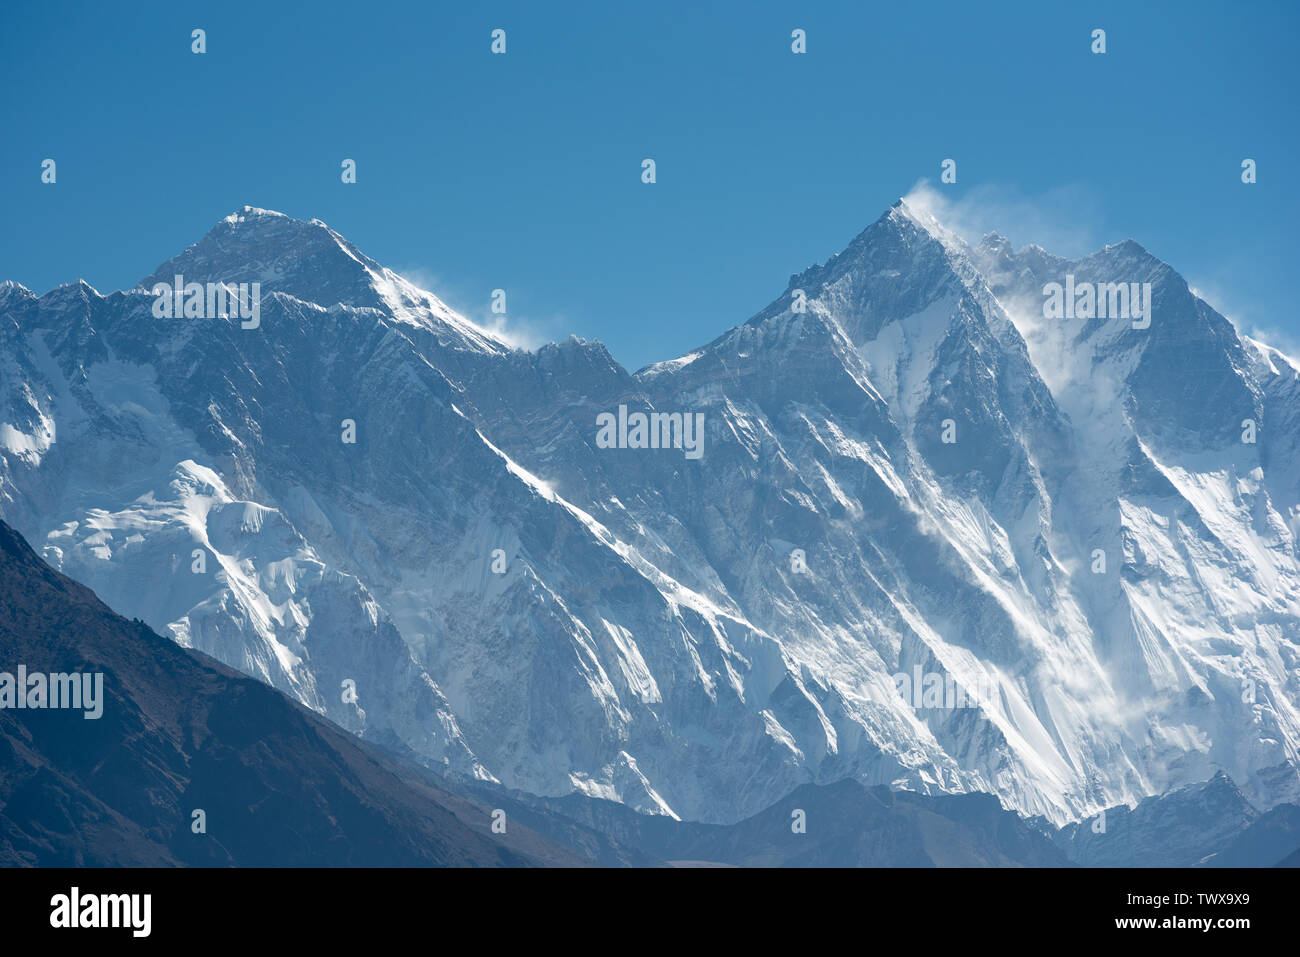 Worlds highers mountain Everest and nearby Lhotse on clear day in Nepal Himalayas Stock Photo